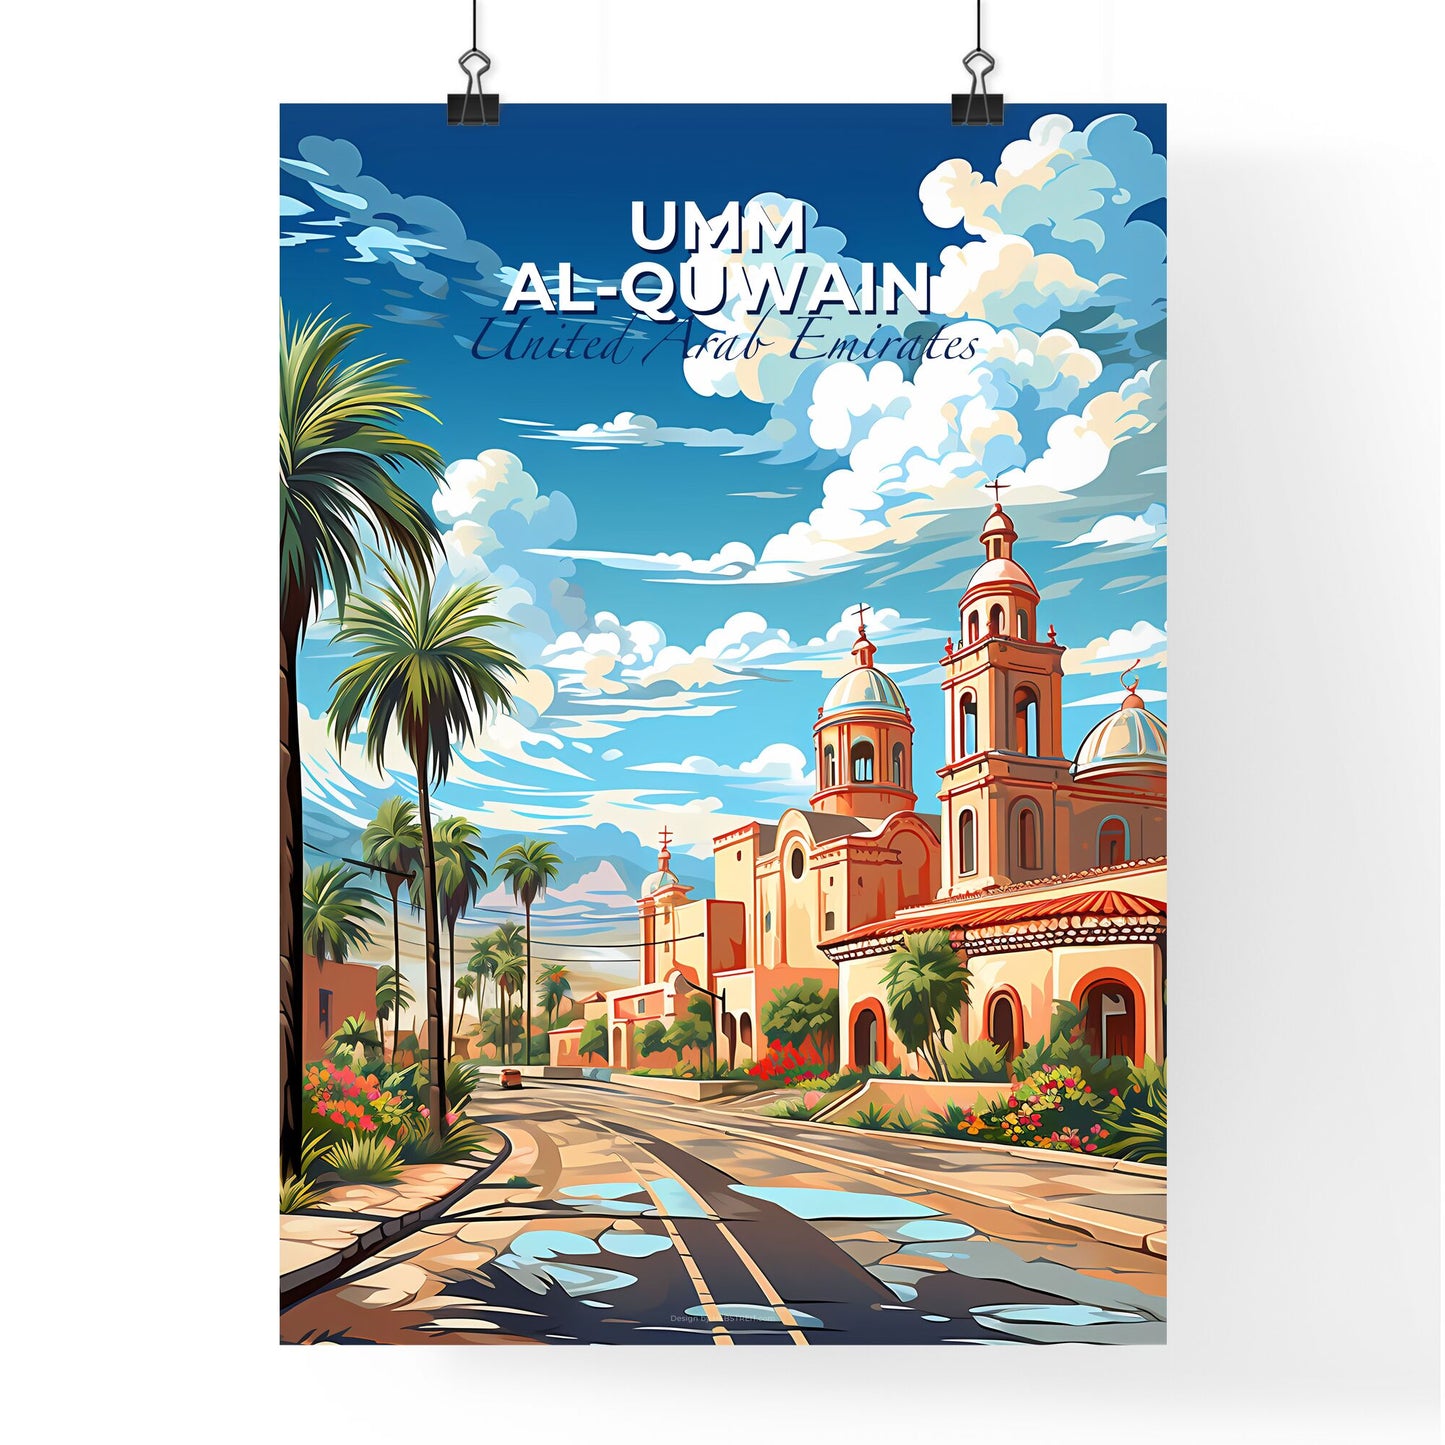 Vibrant Painting Depicting Umm al-Quwain Skyline with Buildings, Palm Trees, and Road Default Title